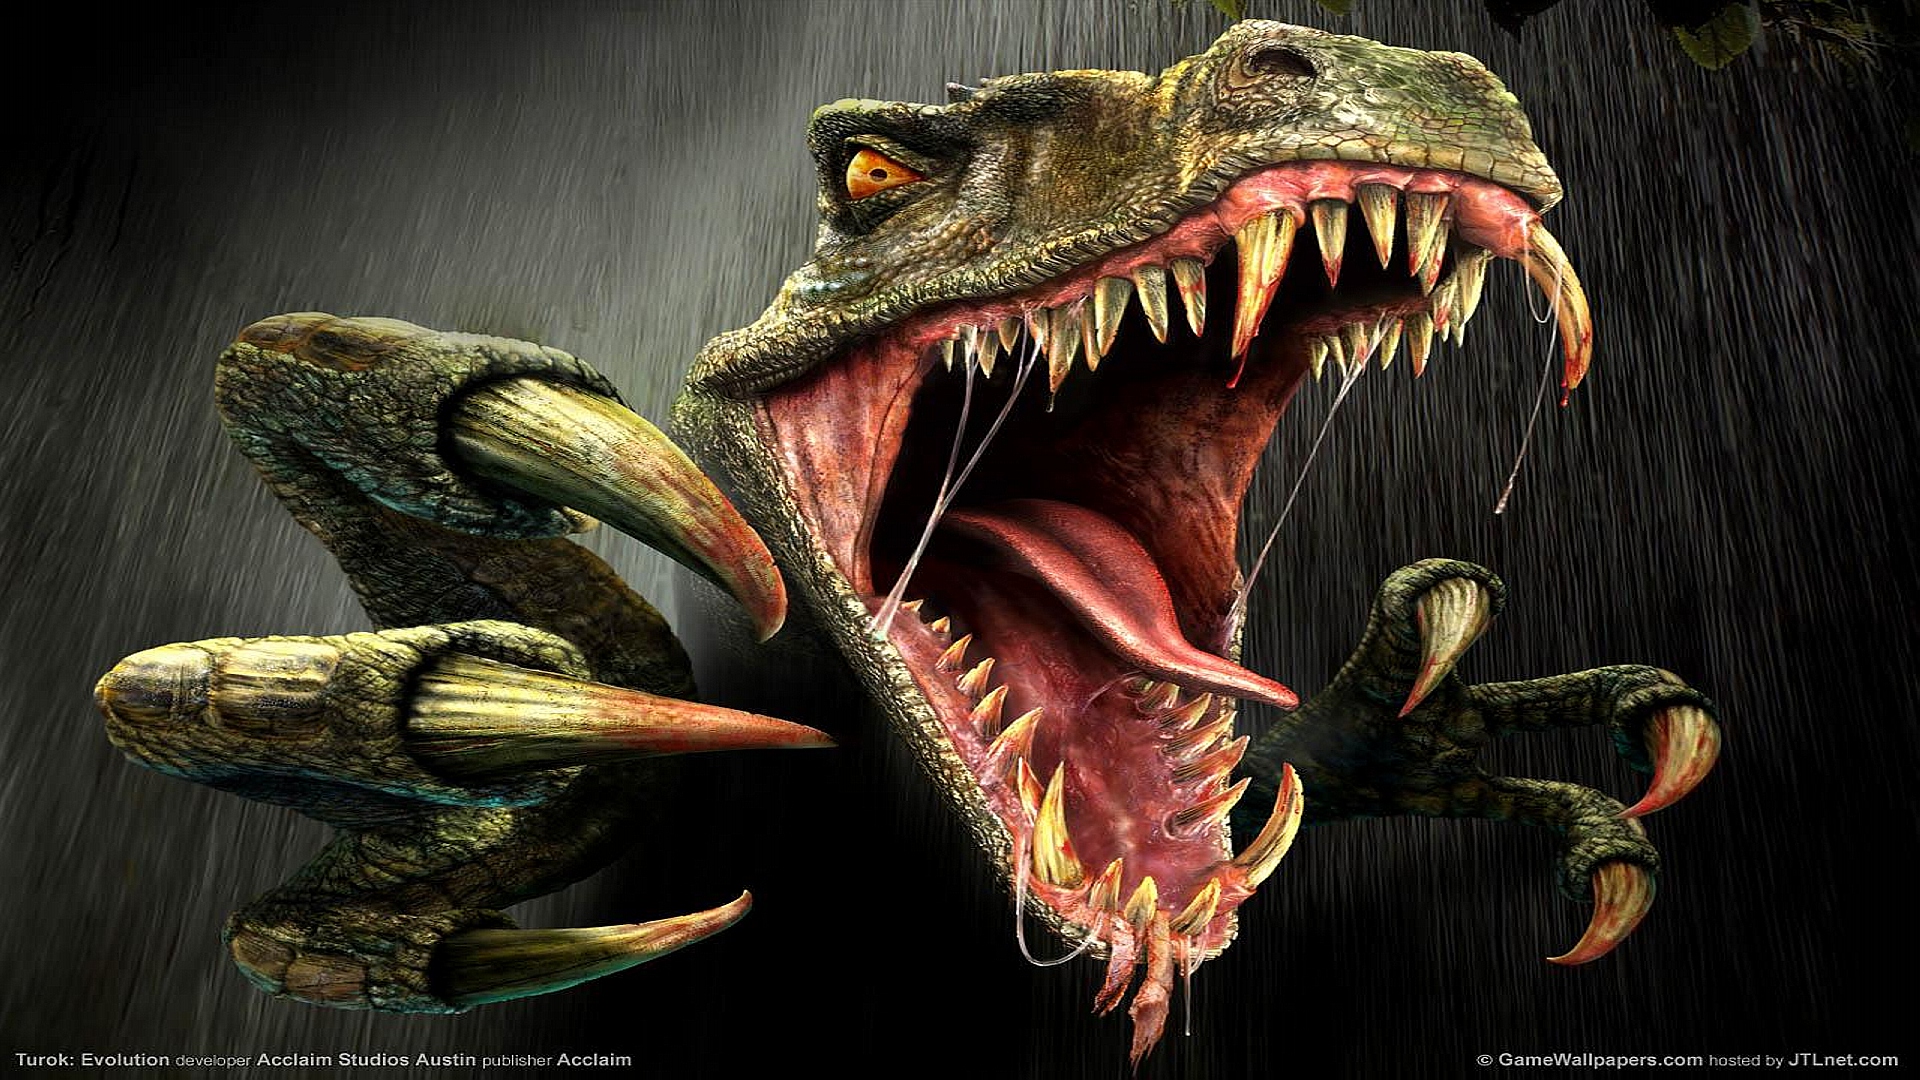 Dinosaur Image Miscellaneous Other Top Wallpaper